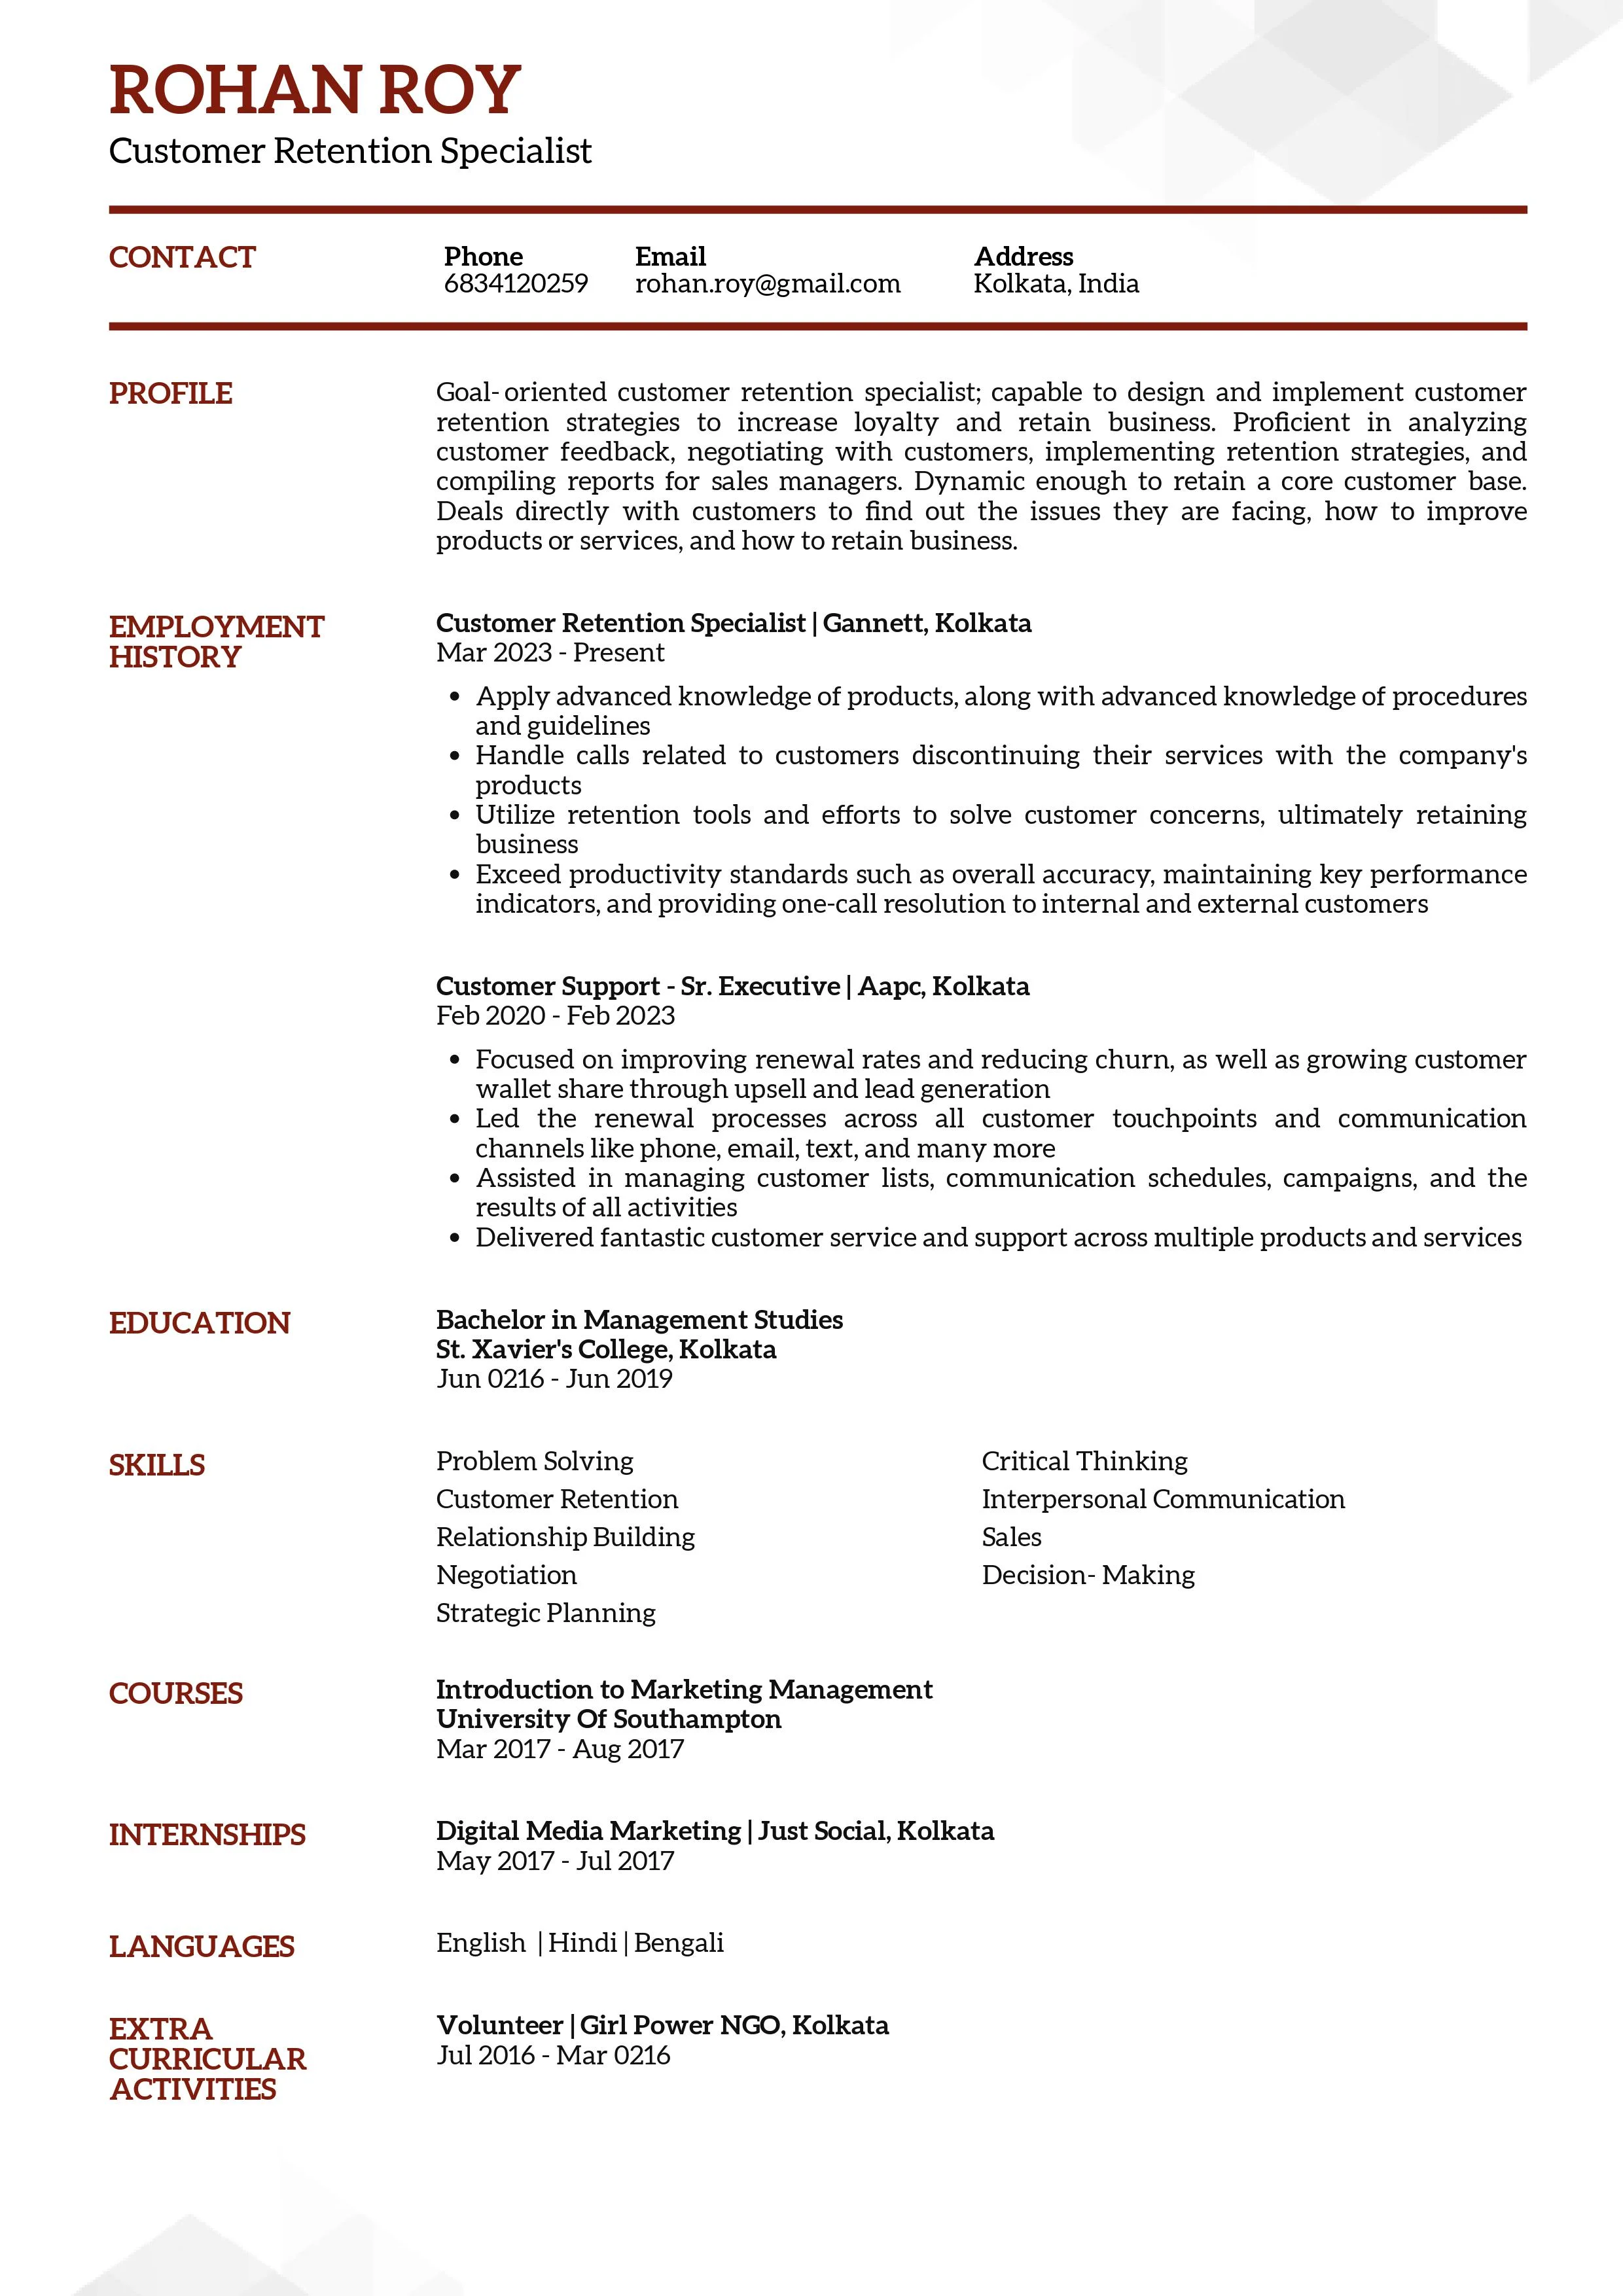 Sample Resume of Customer Retention Specialist | Free Resume Templates & Samples on Resumod.co